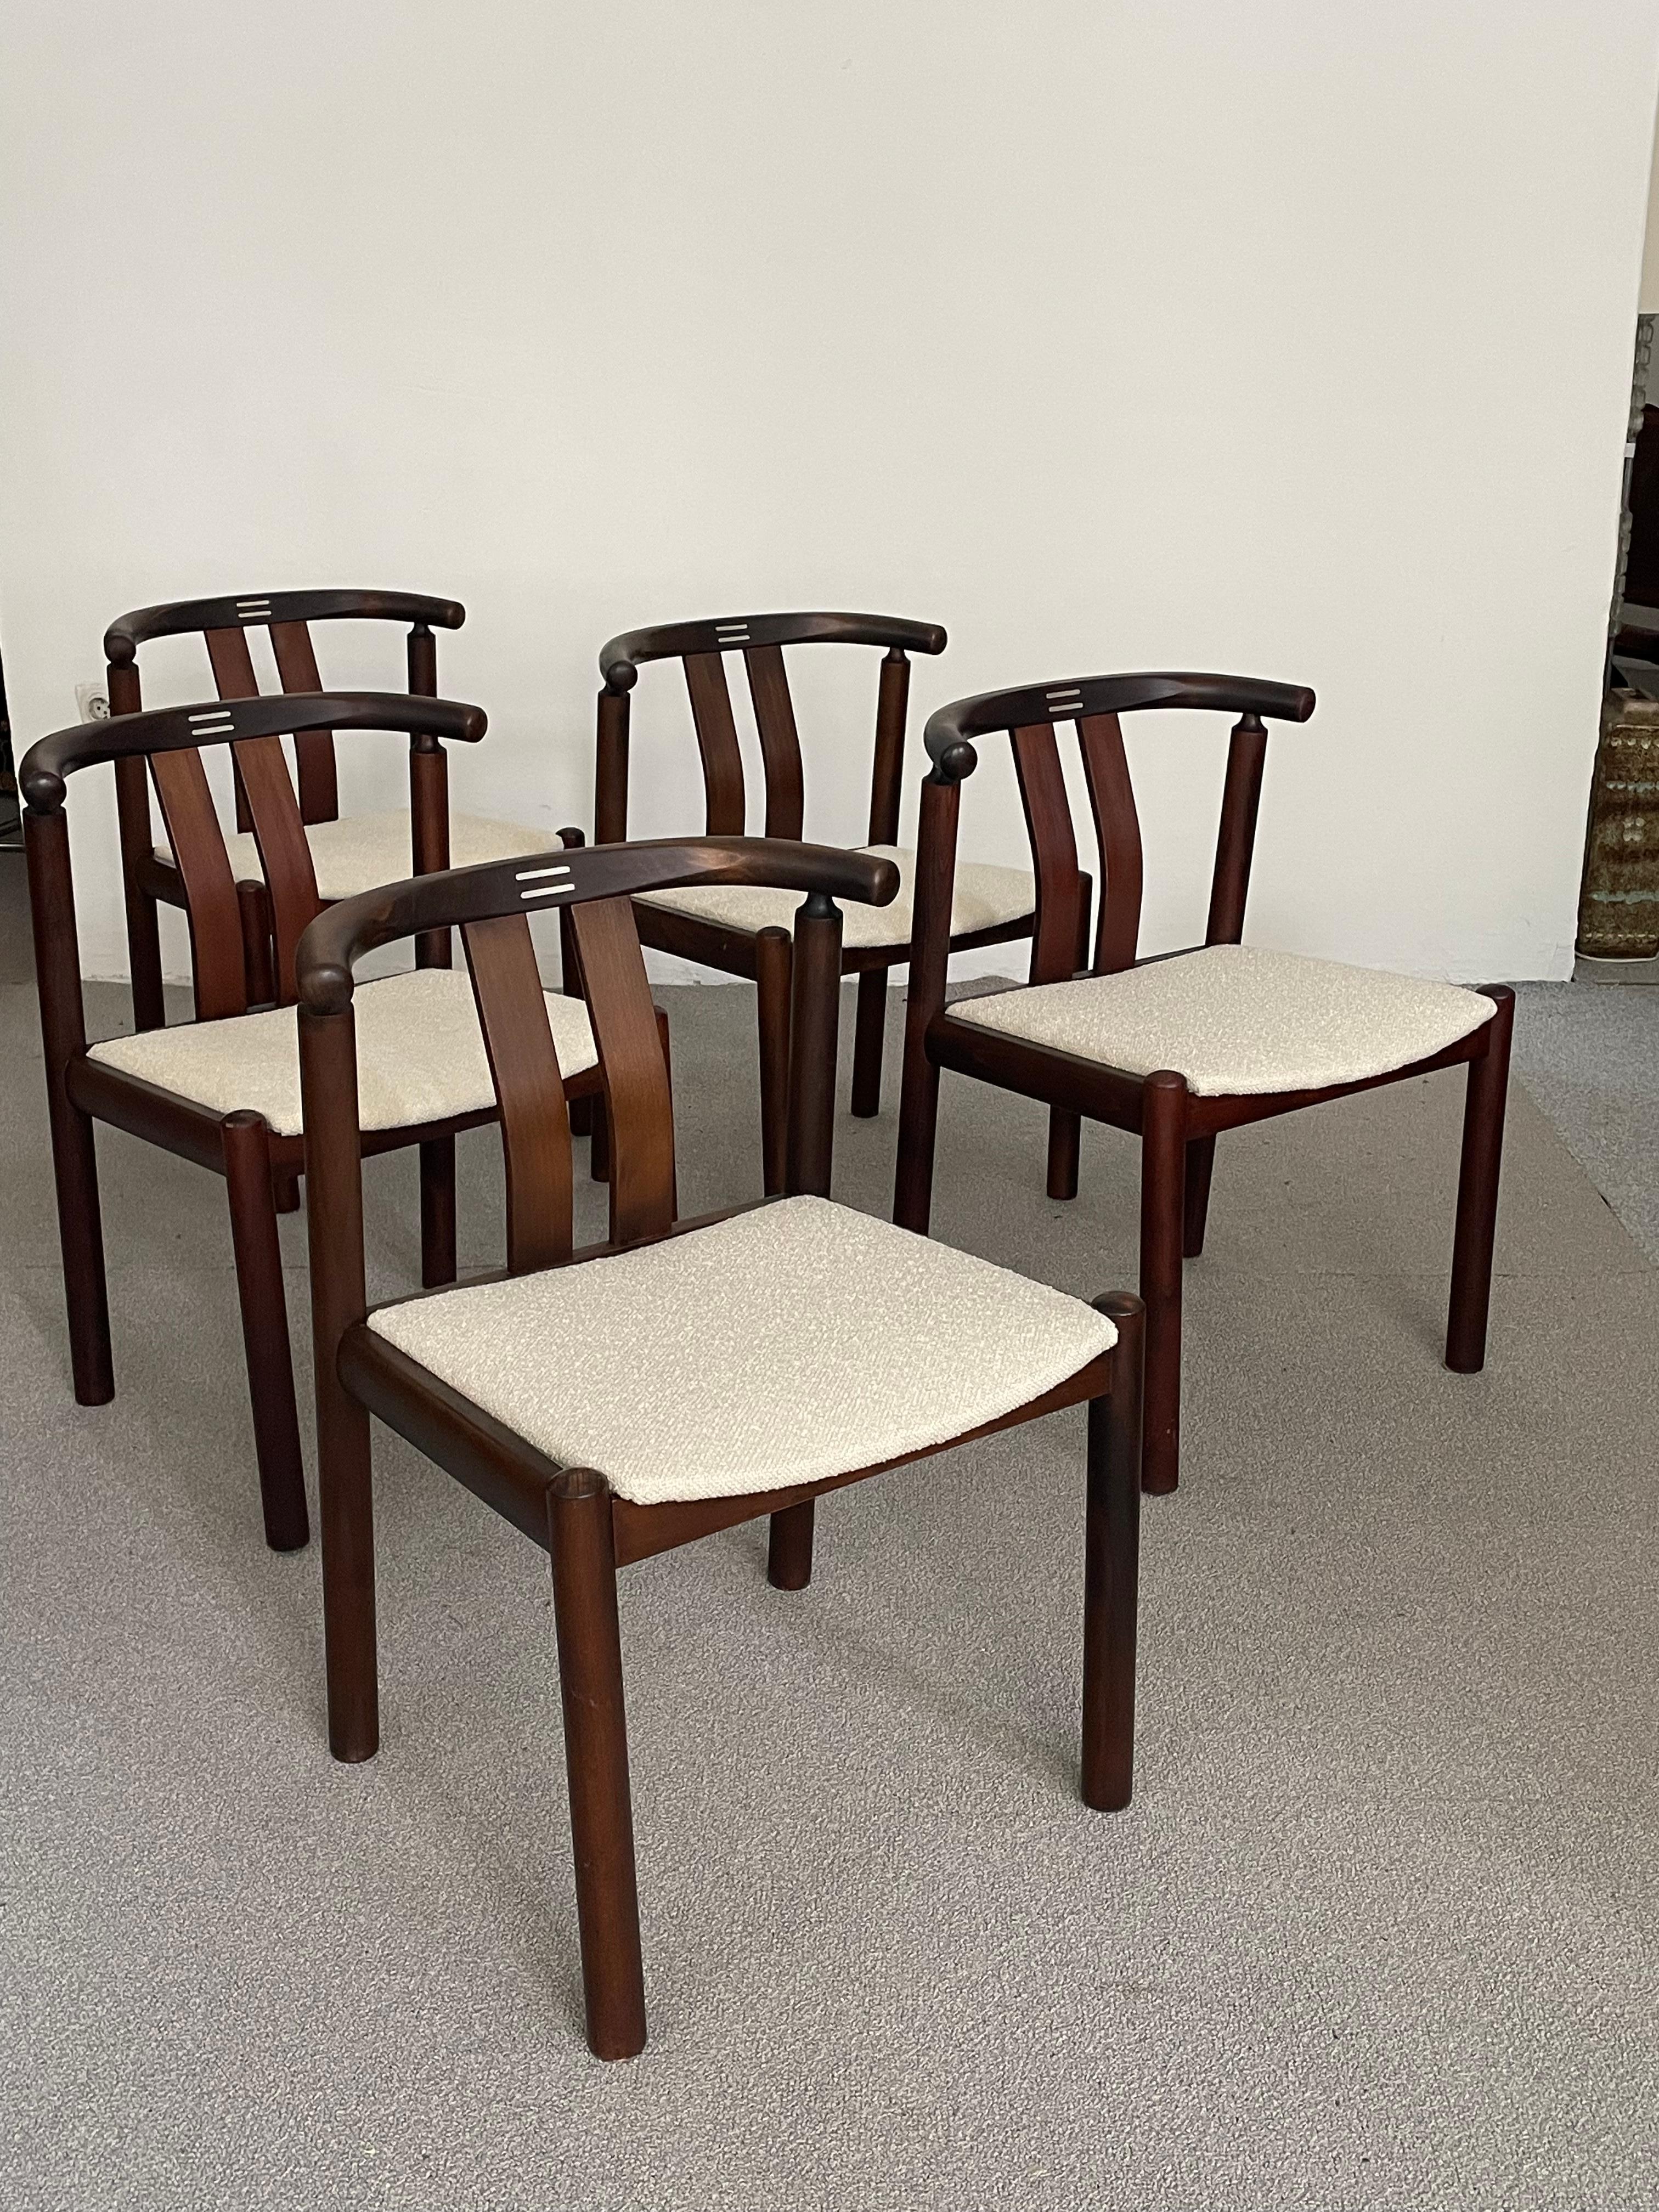 Artibus presents this Vintage Mid-Century Modern dining chairs by Hans j Frydendal for Boltinge . Model Cleopatra . Manufactured in 1970s Denmark. The chairs has been reupholstered with a high-quality fabric in beige.
Good restored condition with